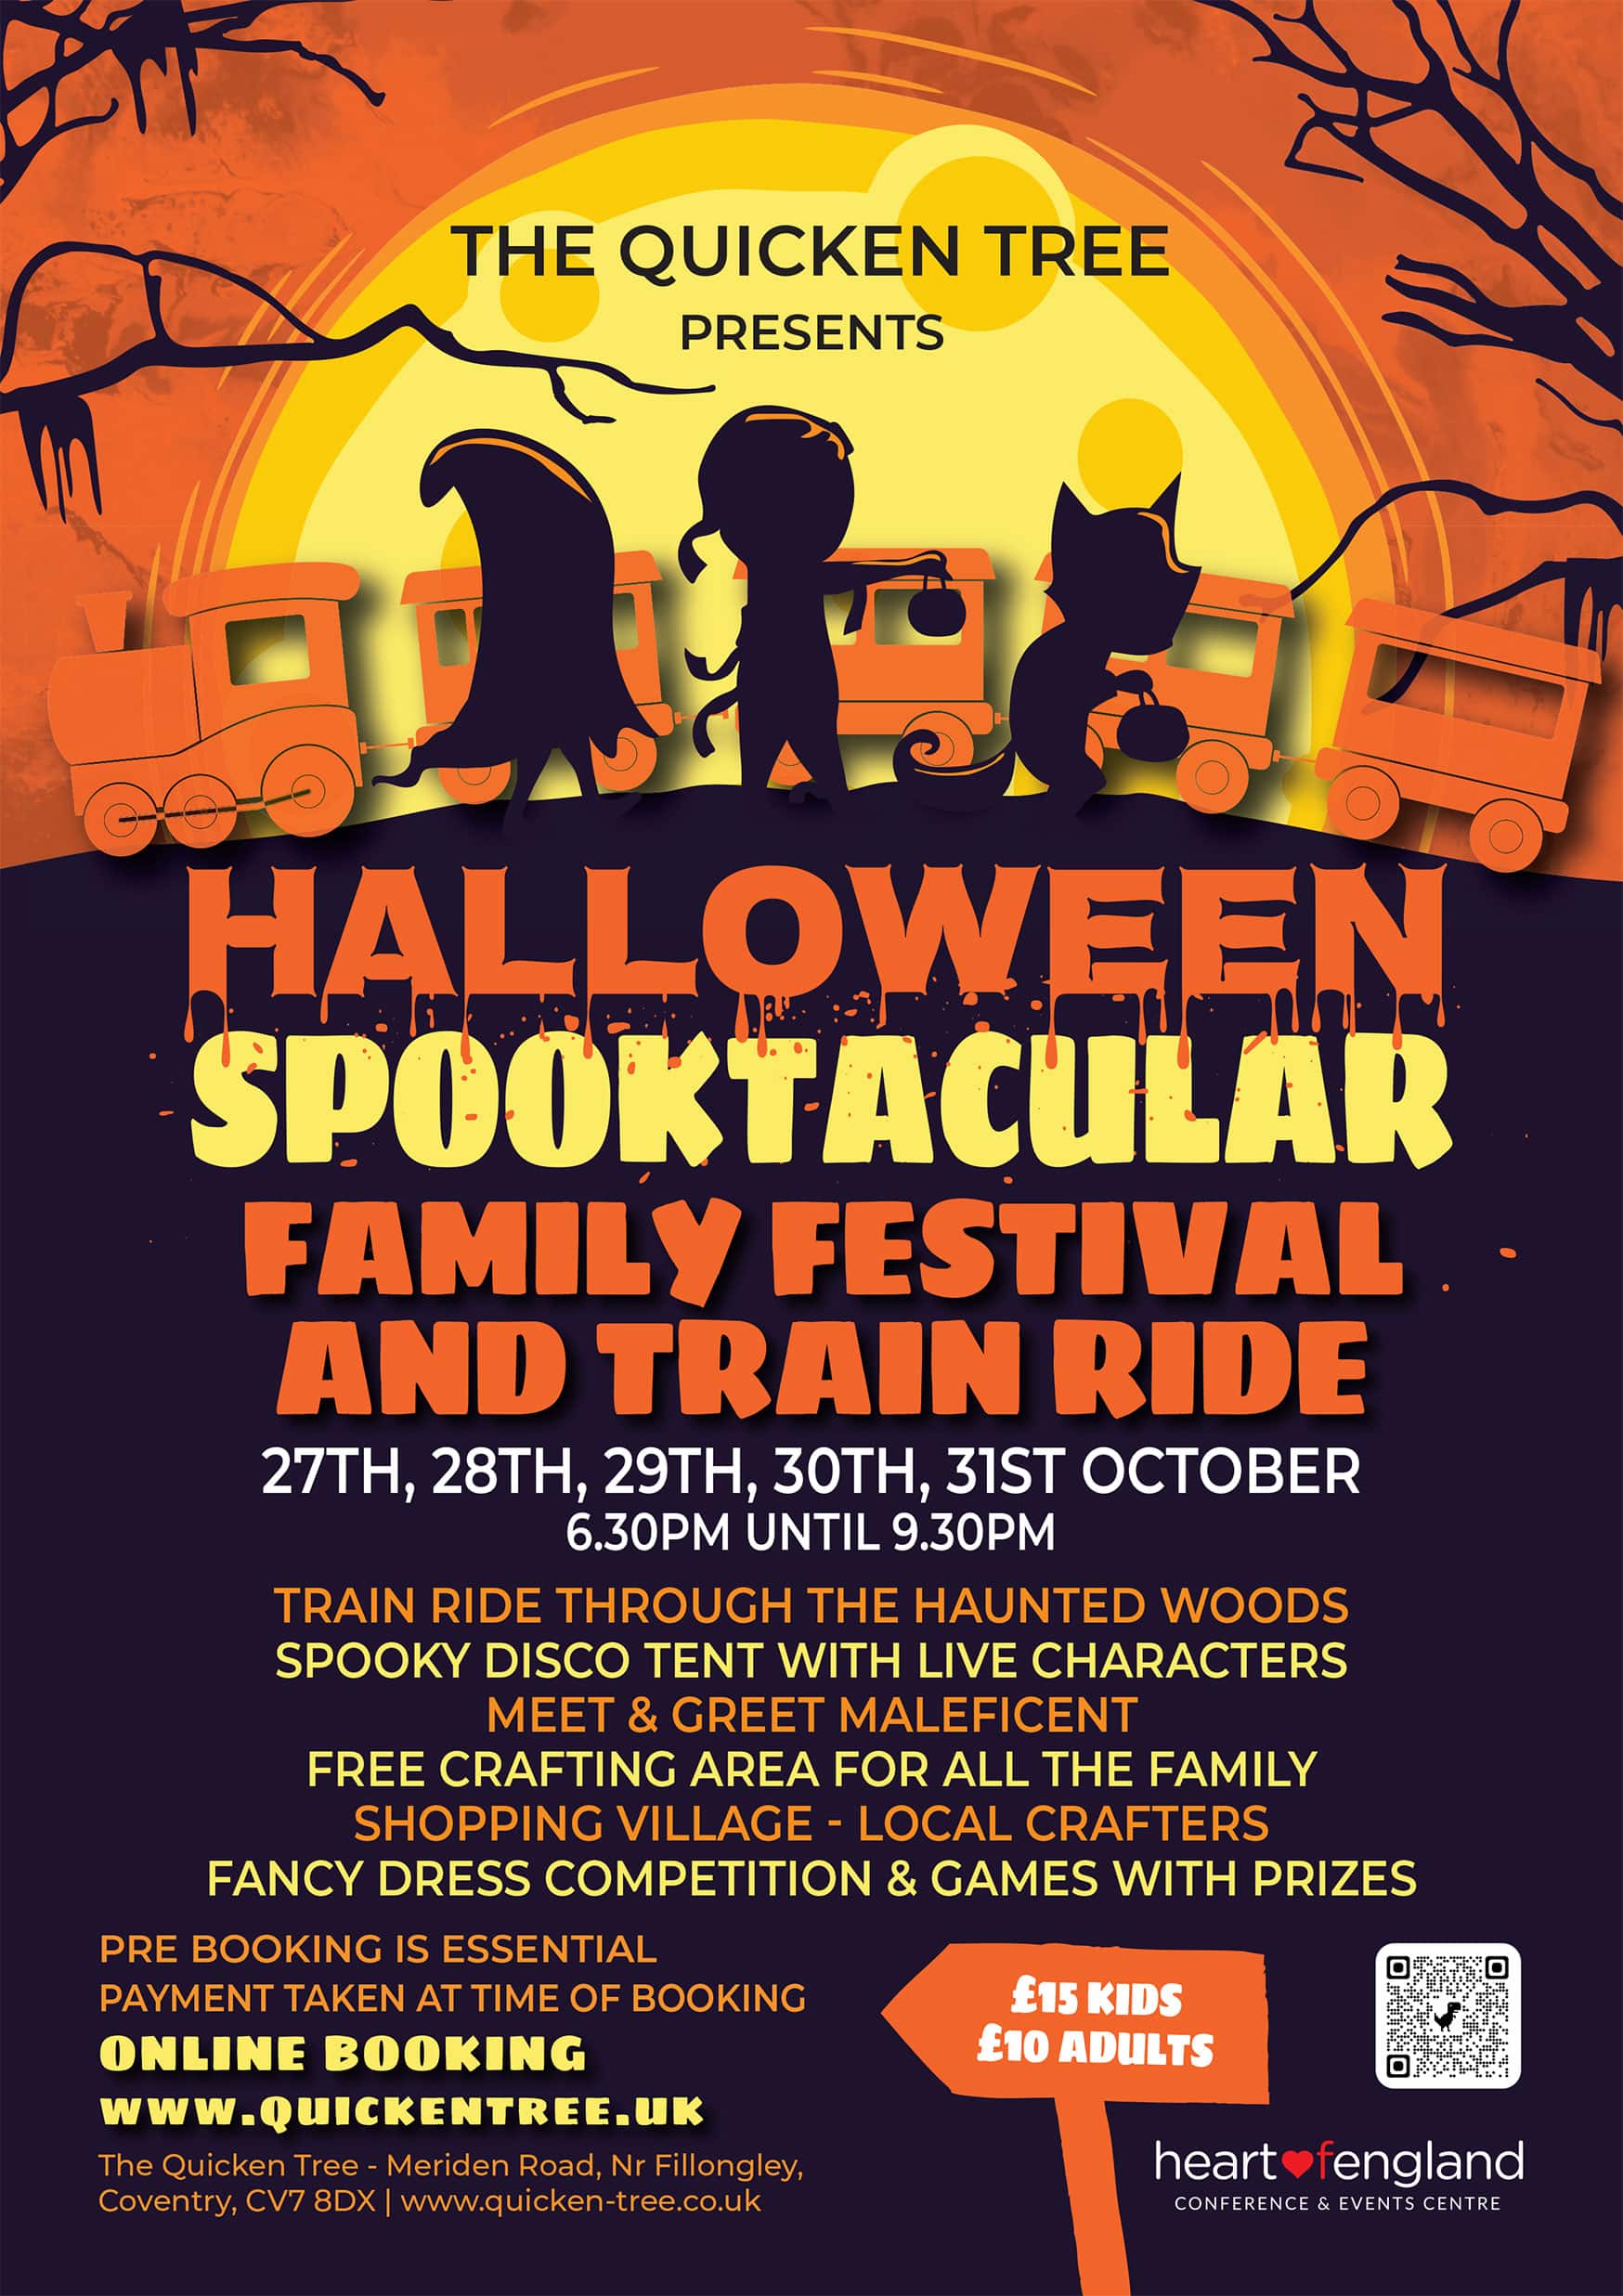 Halloween Spooktacular Family Festival And Train Ride - The Heart of England